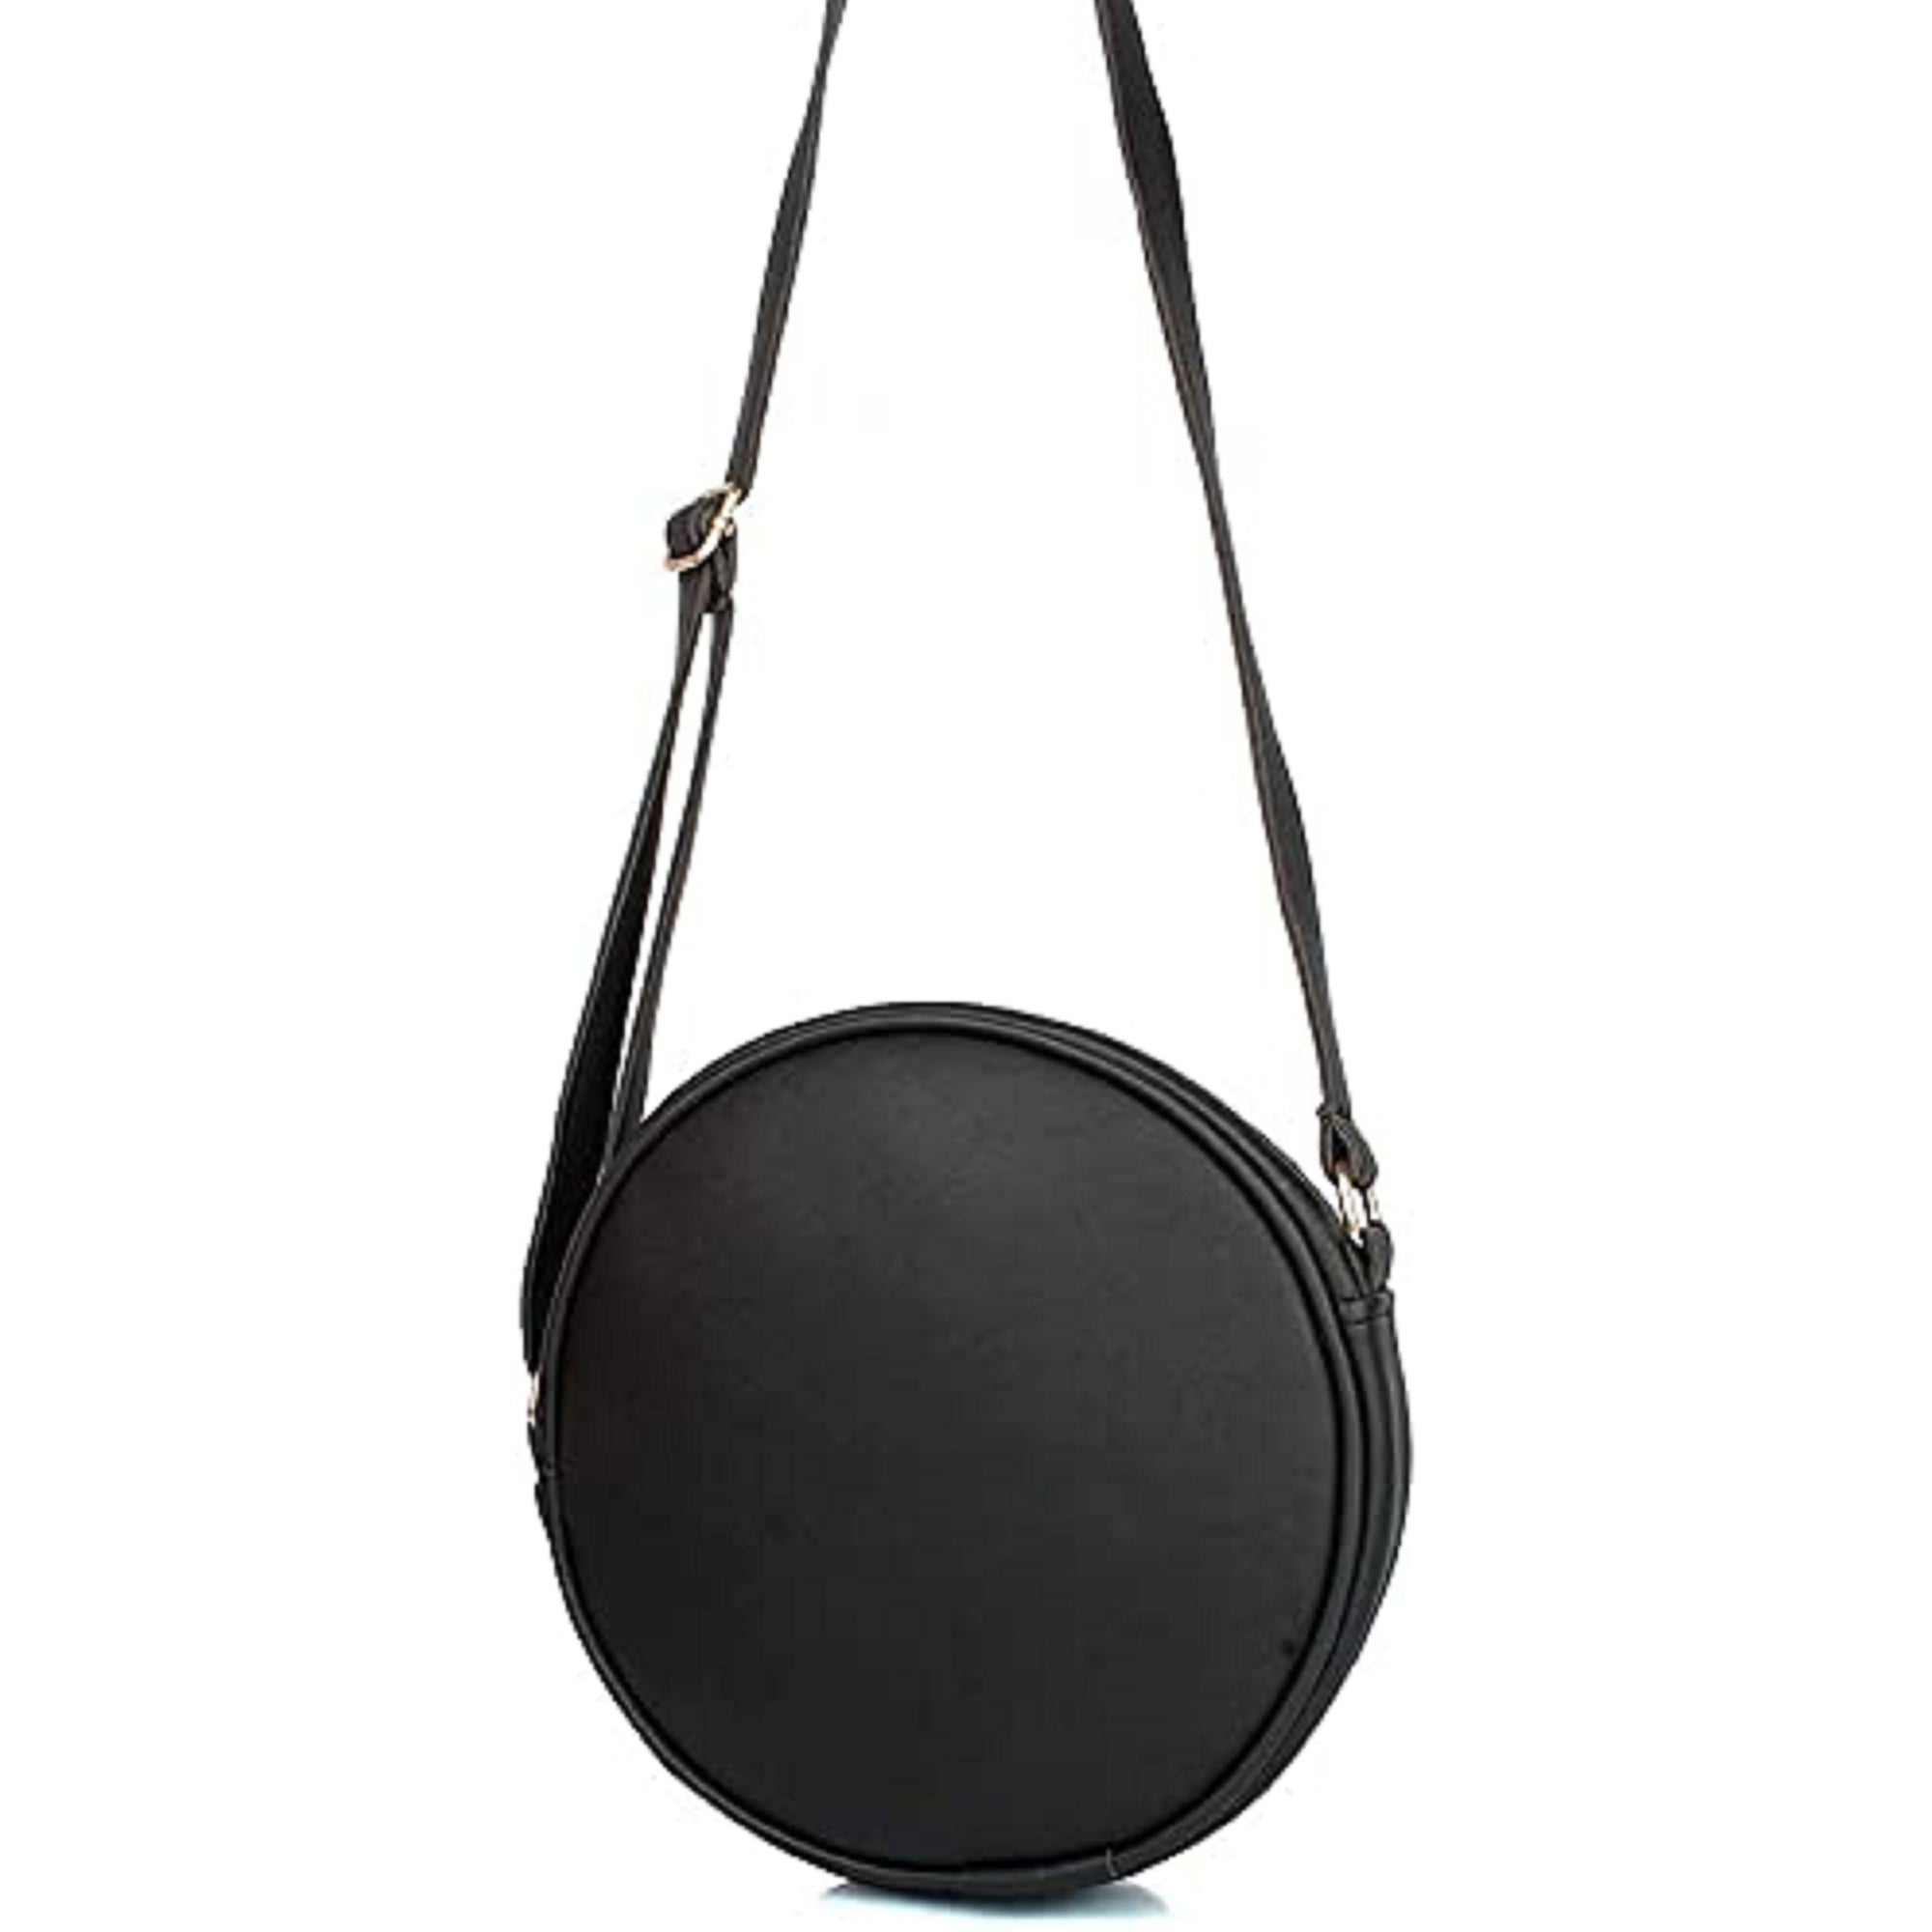 TMN - Women Black Vegan Leather Sling Bag with Attached Teddy